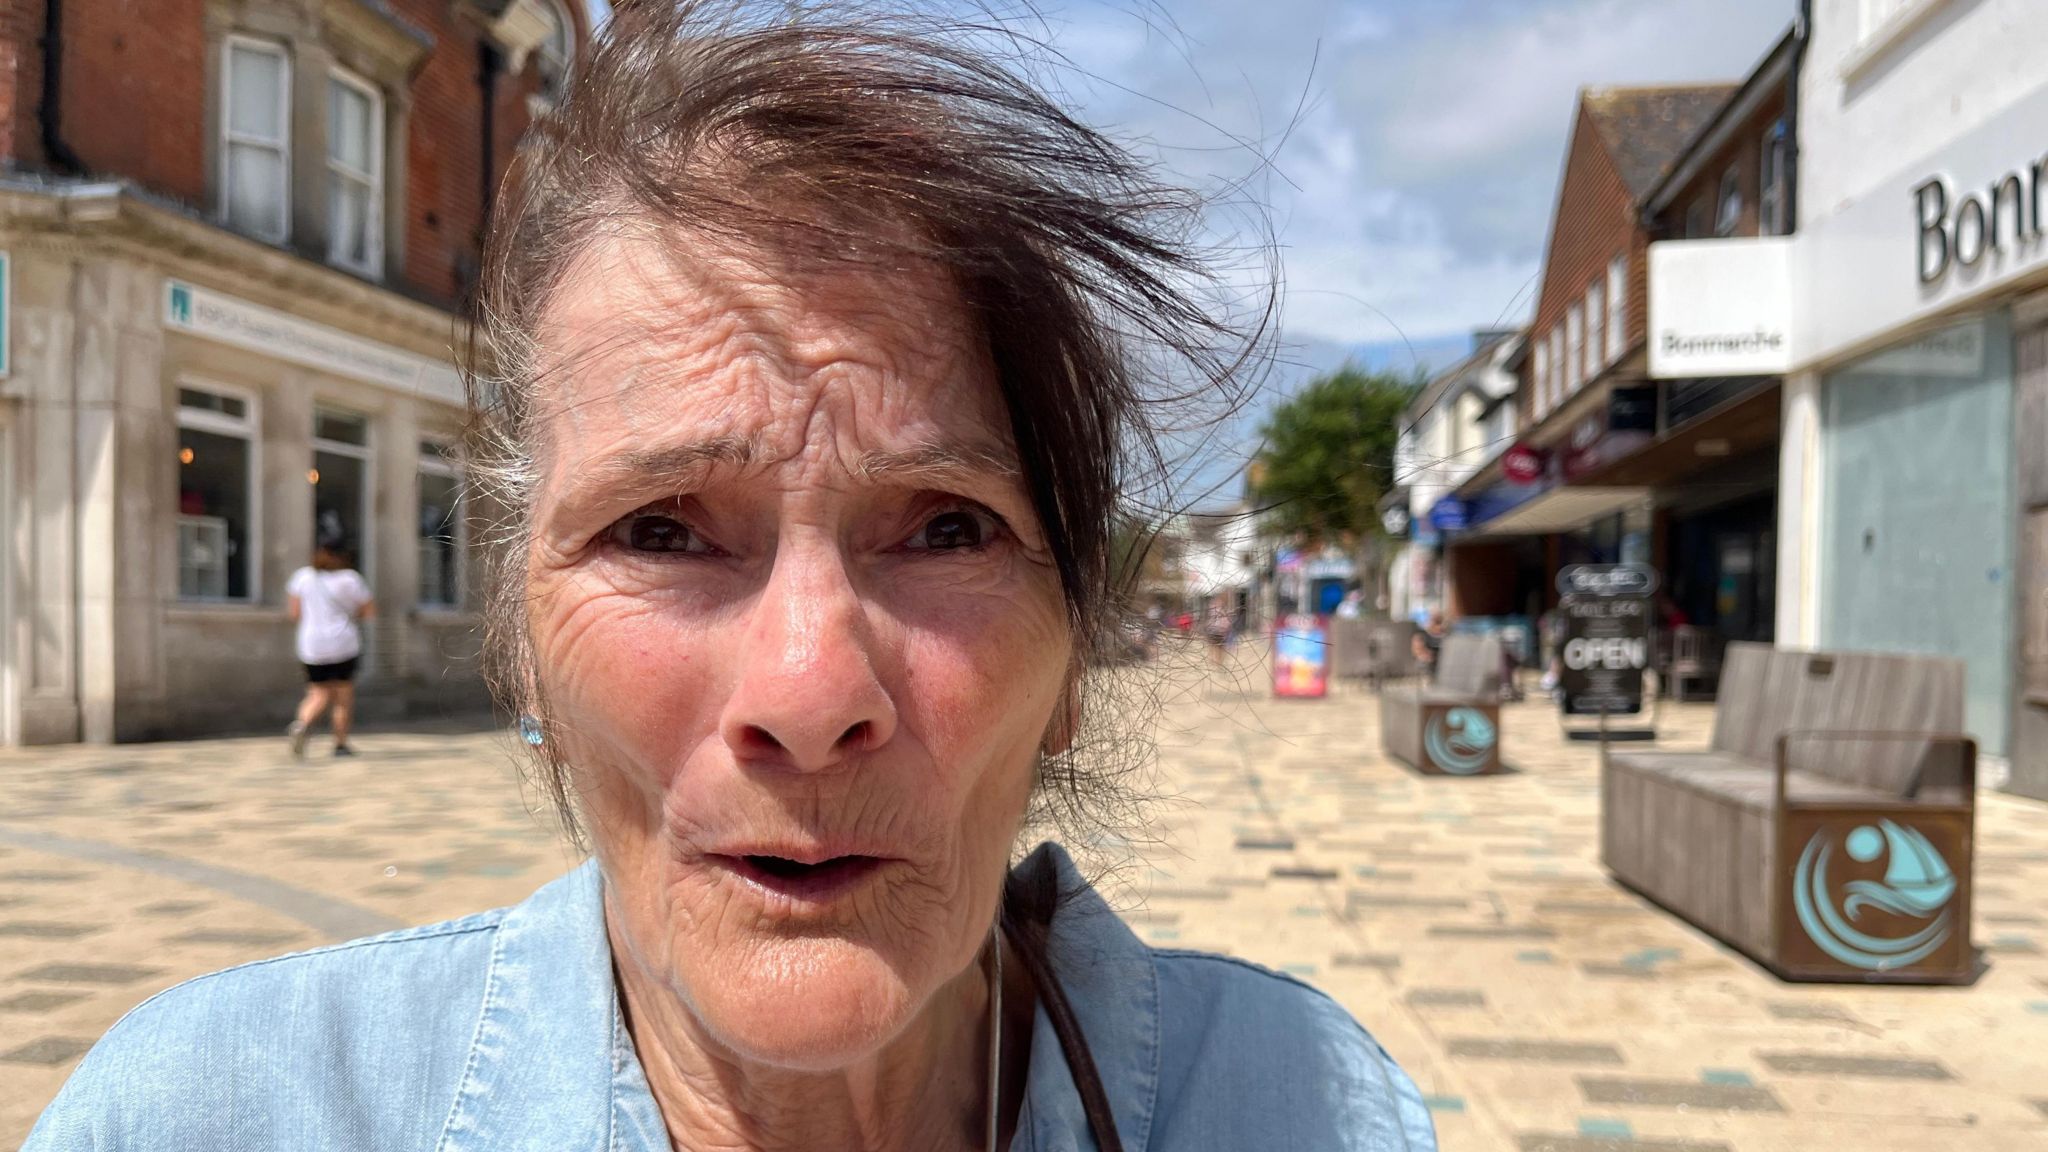 Susan Smith sits in the high street. Her dark hair is tied back and she wears a blue shirt.